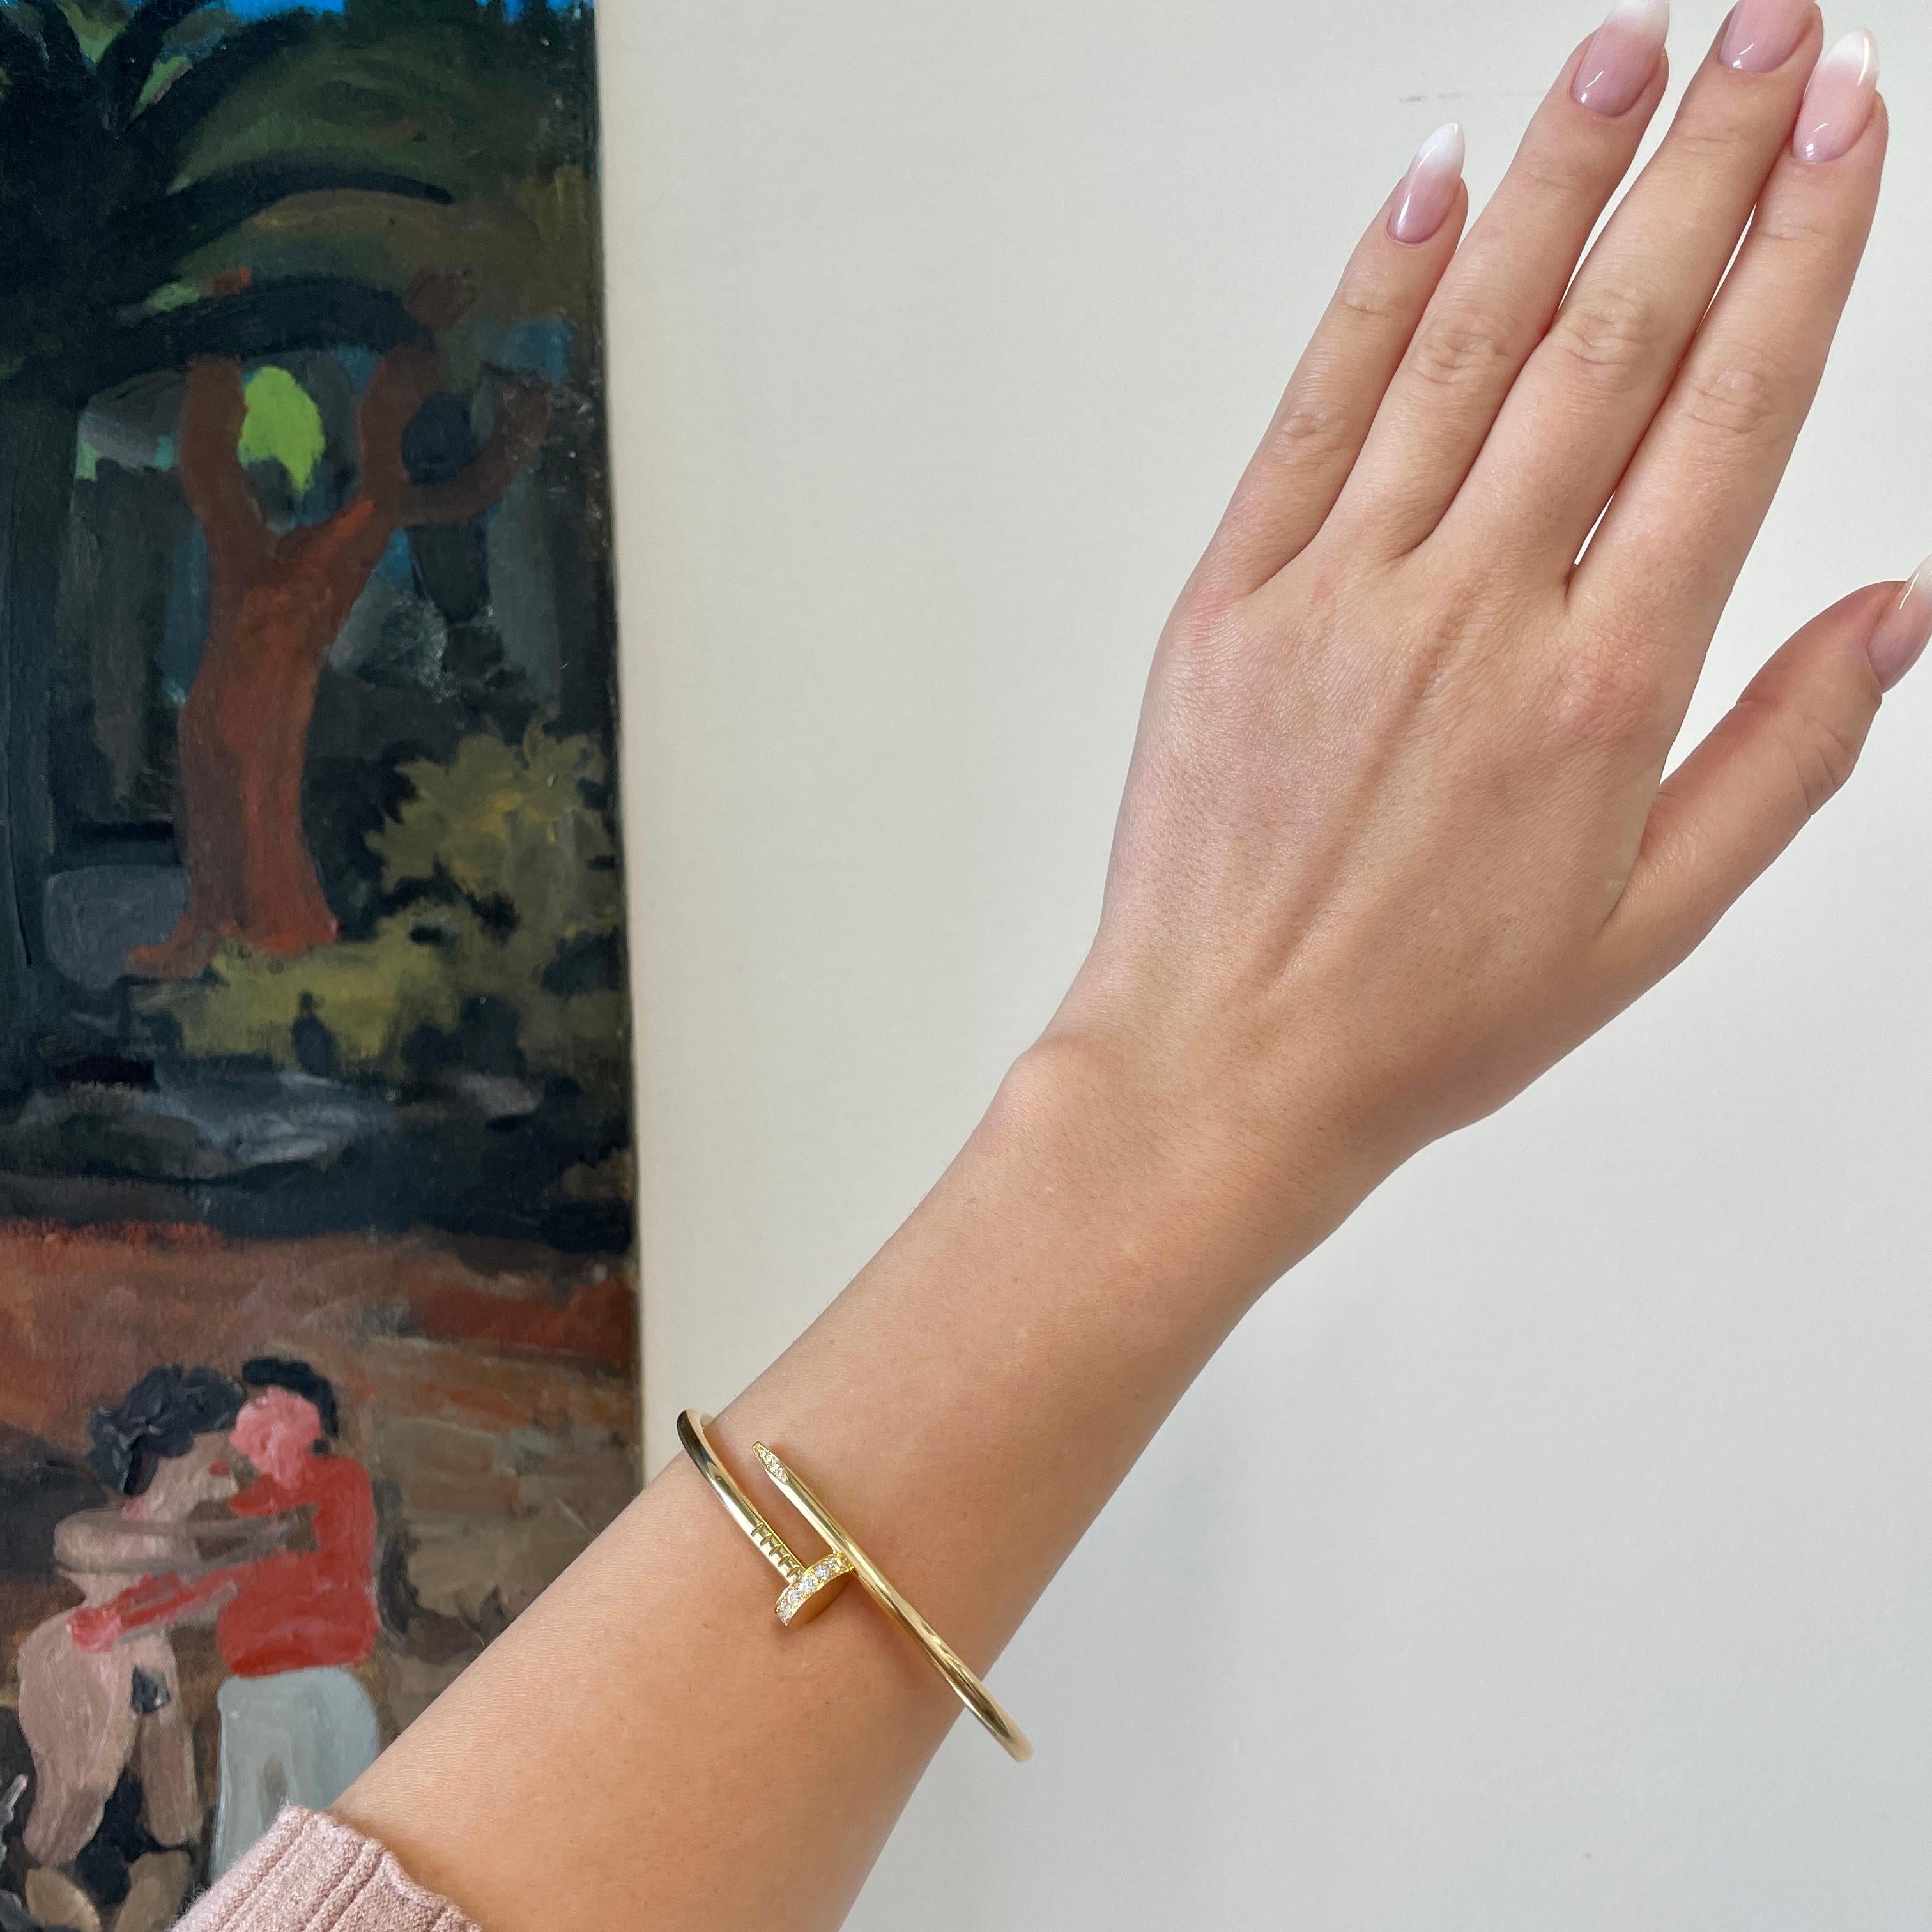 Get yourself the iconic and desirable look that everyone is on the hunt for. Cartier Juste Un Clou Yellow Gold Bracelet is known for its bold and untraditional style. It's everything a modern woman needs. When purchasing an item by Cartier you can